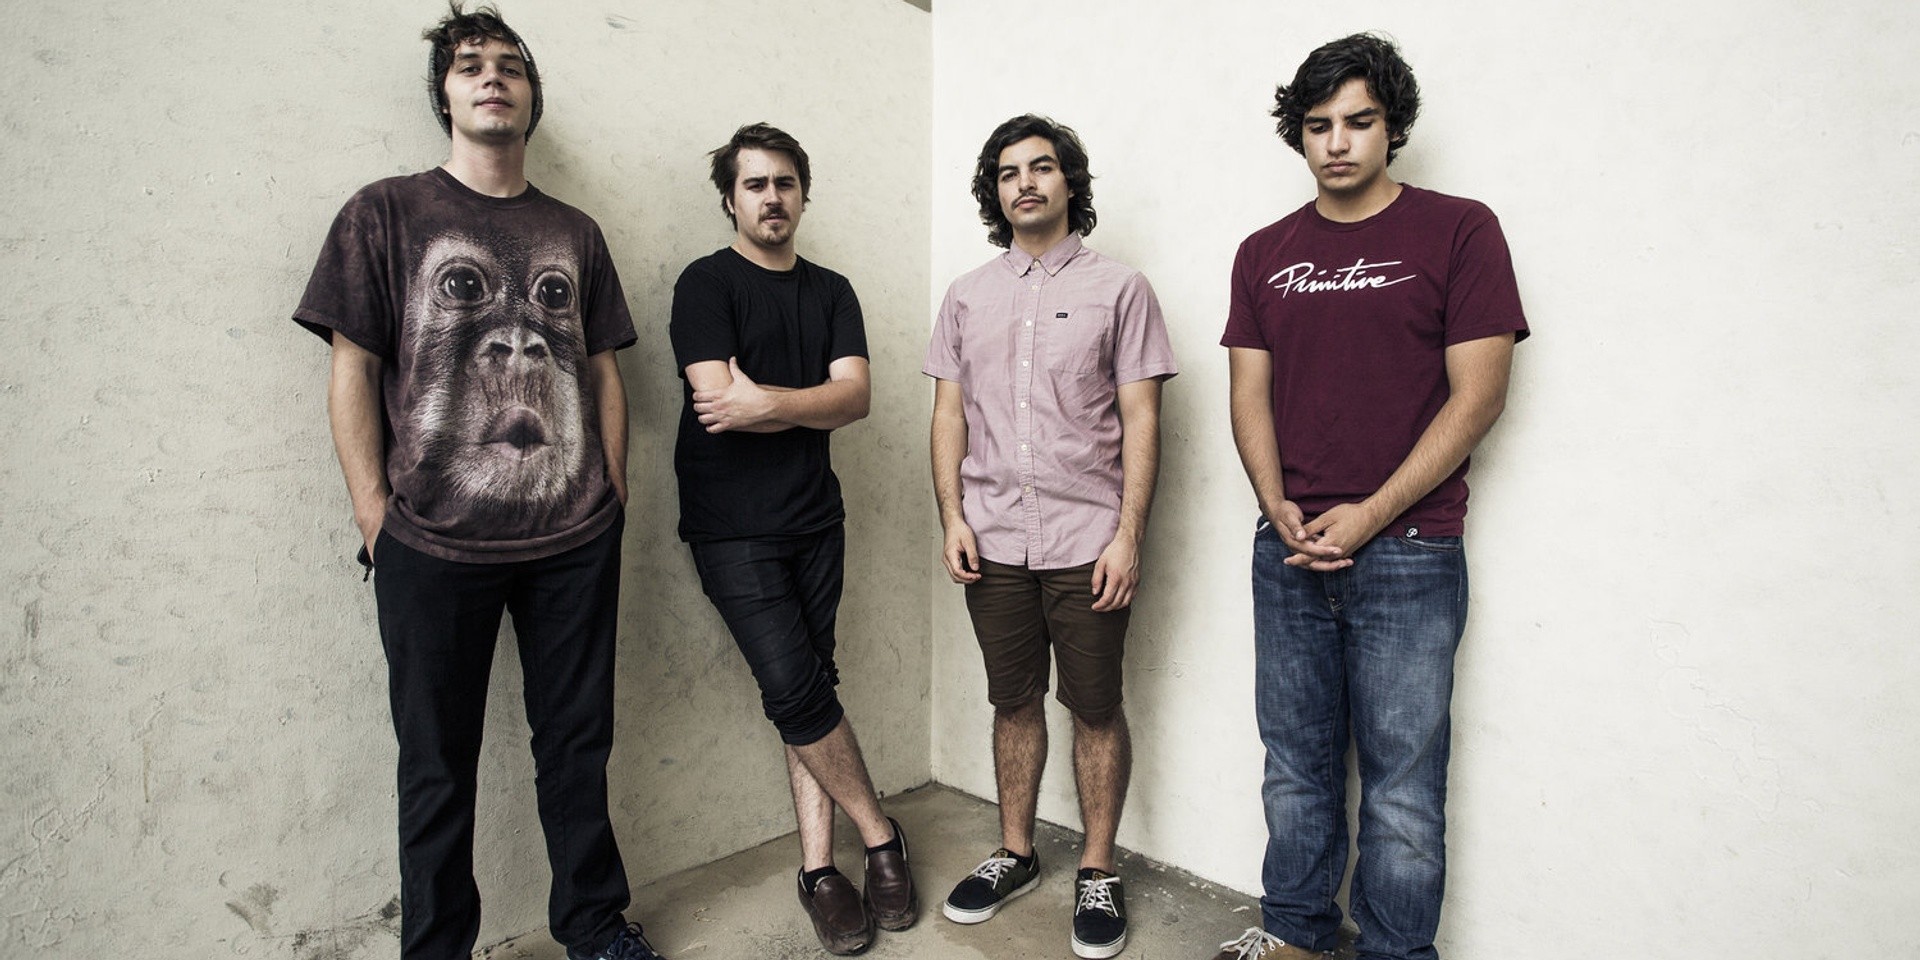 CHON announces Asia tour – shows in Singapore, Malaysia, Hong Kong and more confirmed